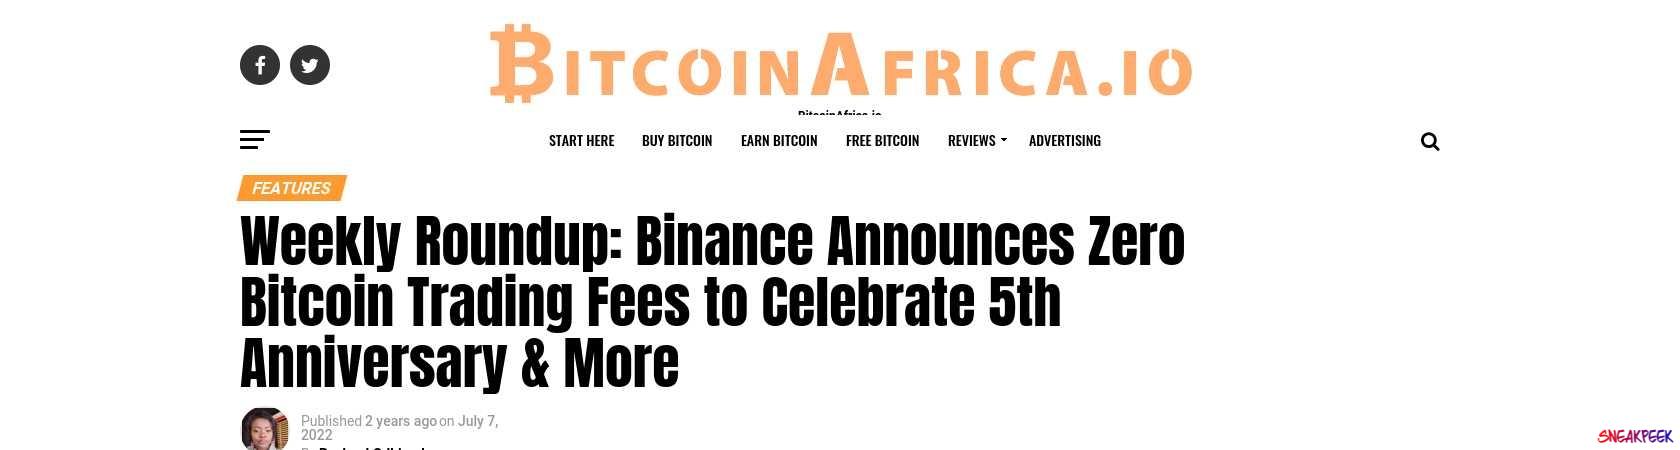 Read the full Article:  ⭲ Weekly Roundup: Binance Announces Zero Bitcoin Trading Fees to Celebrate 5th Anniversary & More